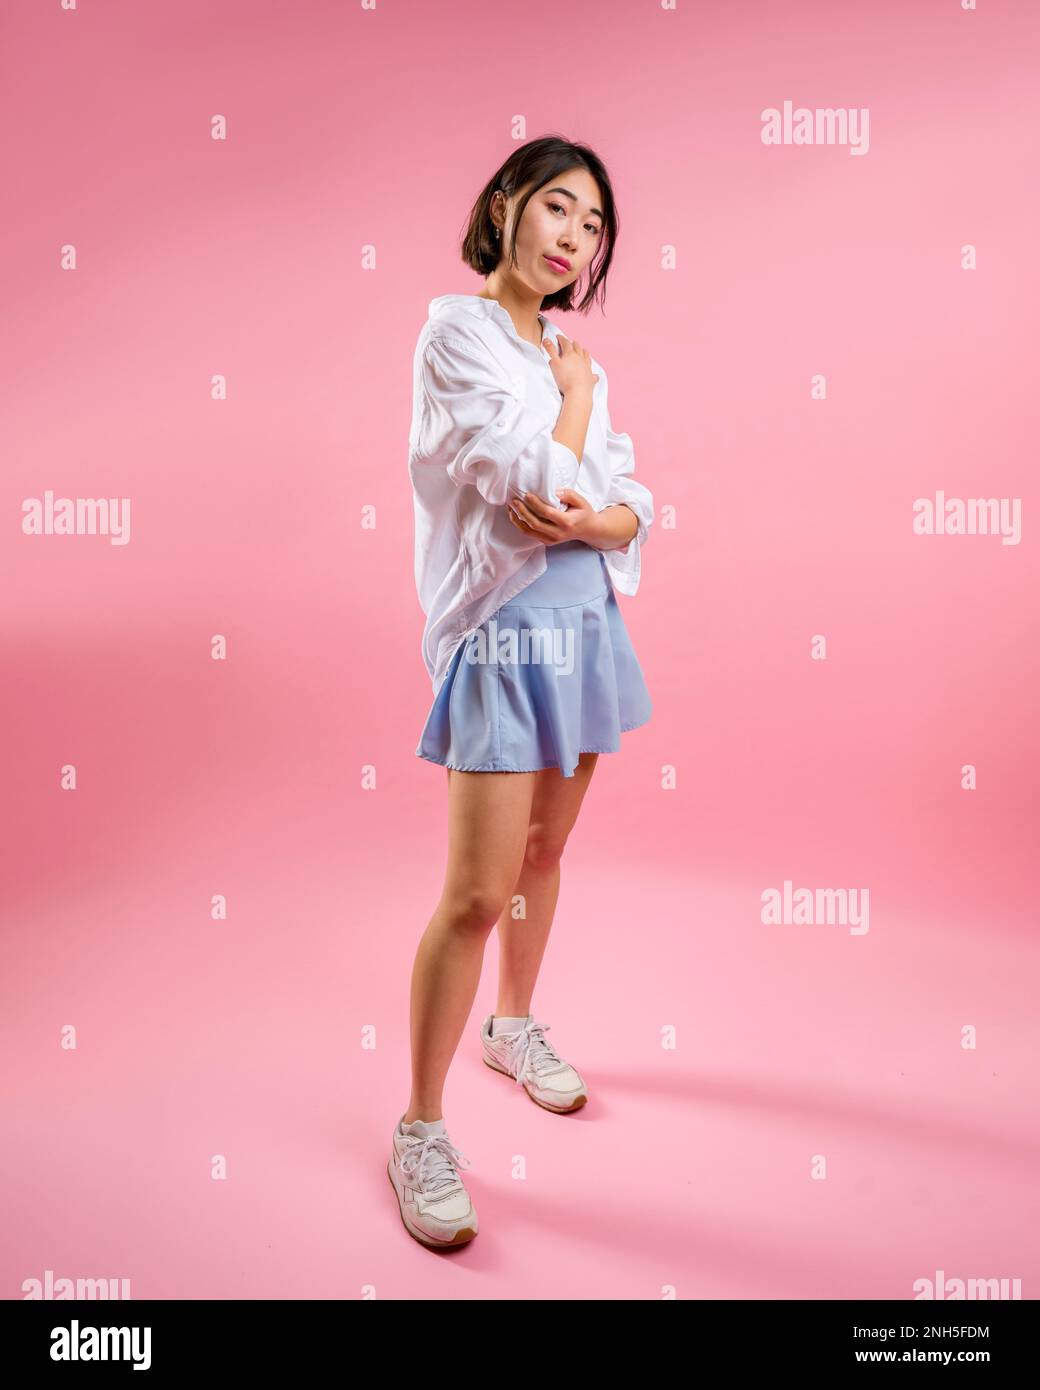 Full Body Asian Woman Short Blue Skirt White Blouse Pink Backdrop Standing with Arms Wrapped Around Waist and Chest Side View Stock Photo